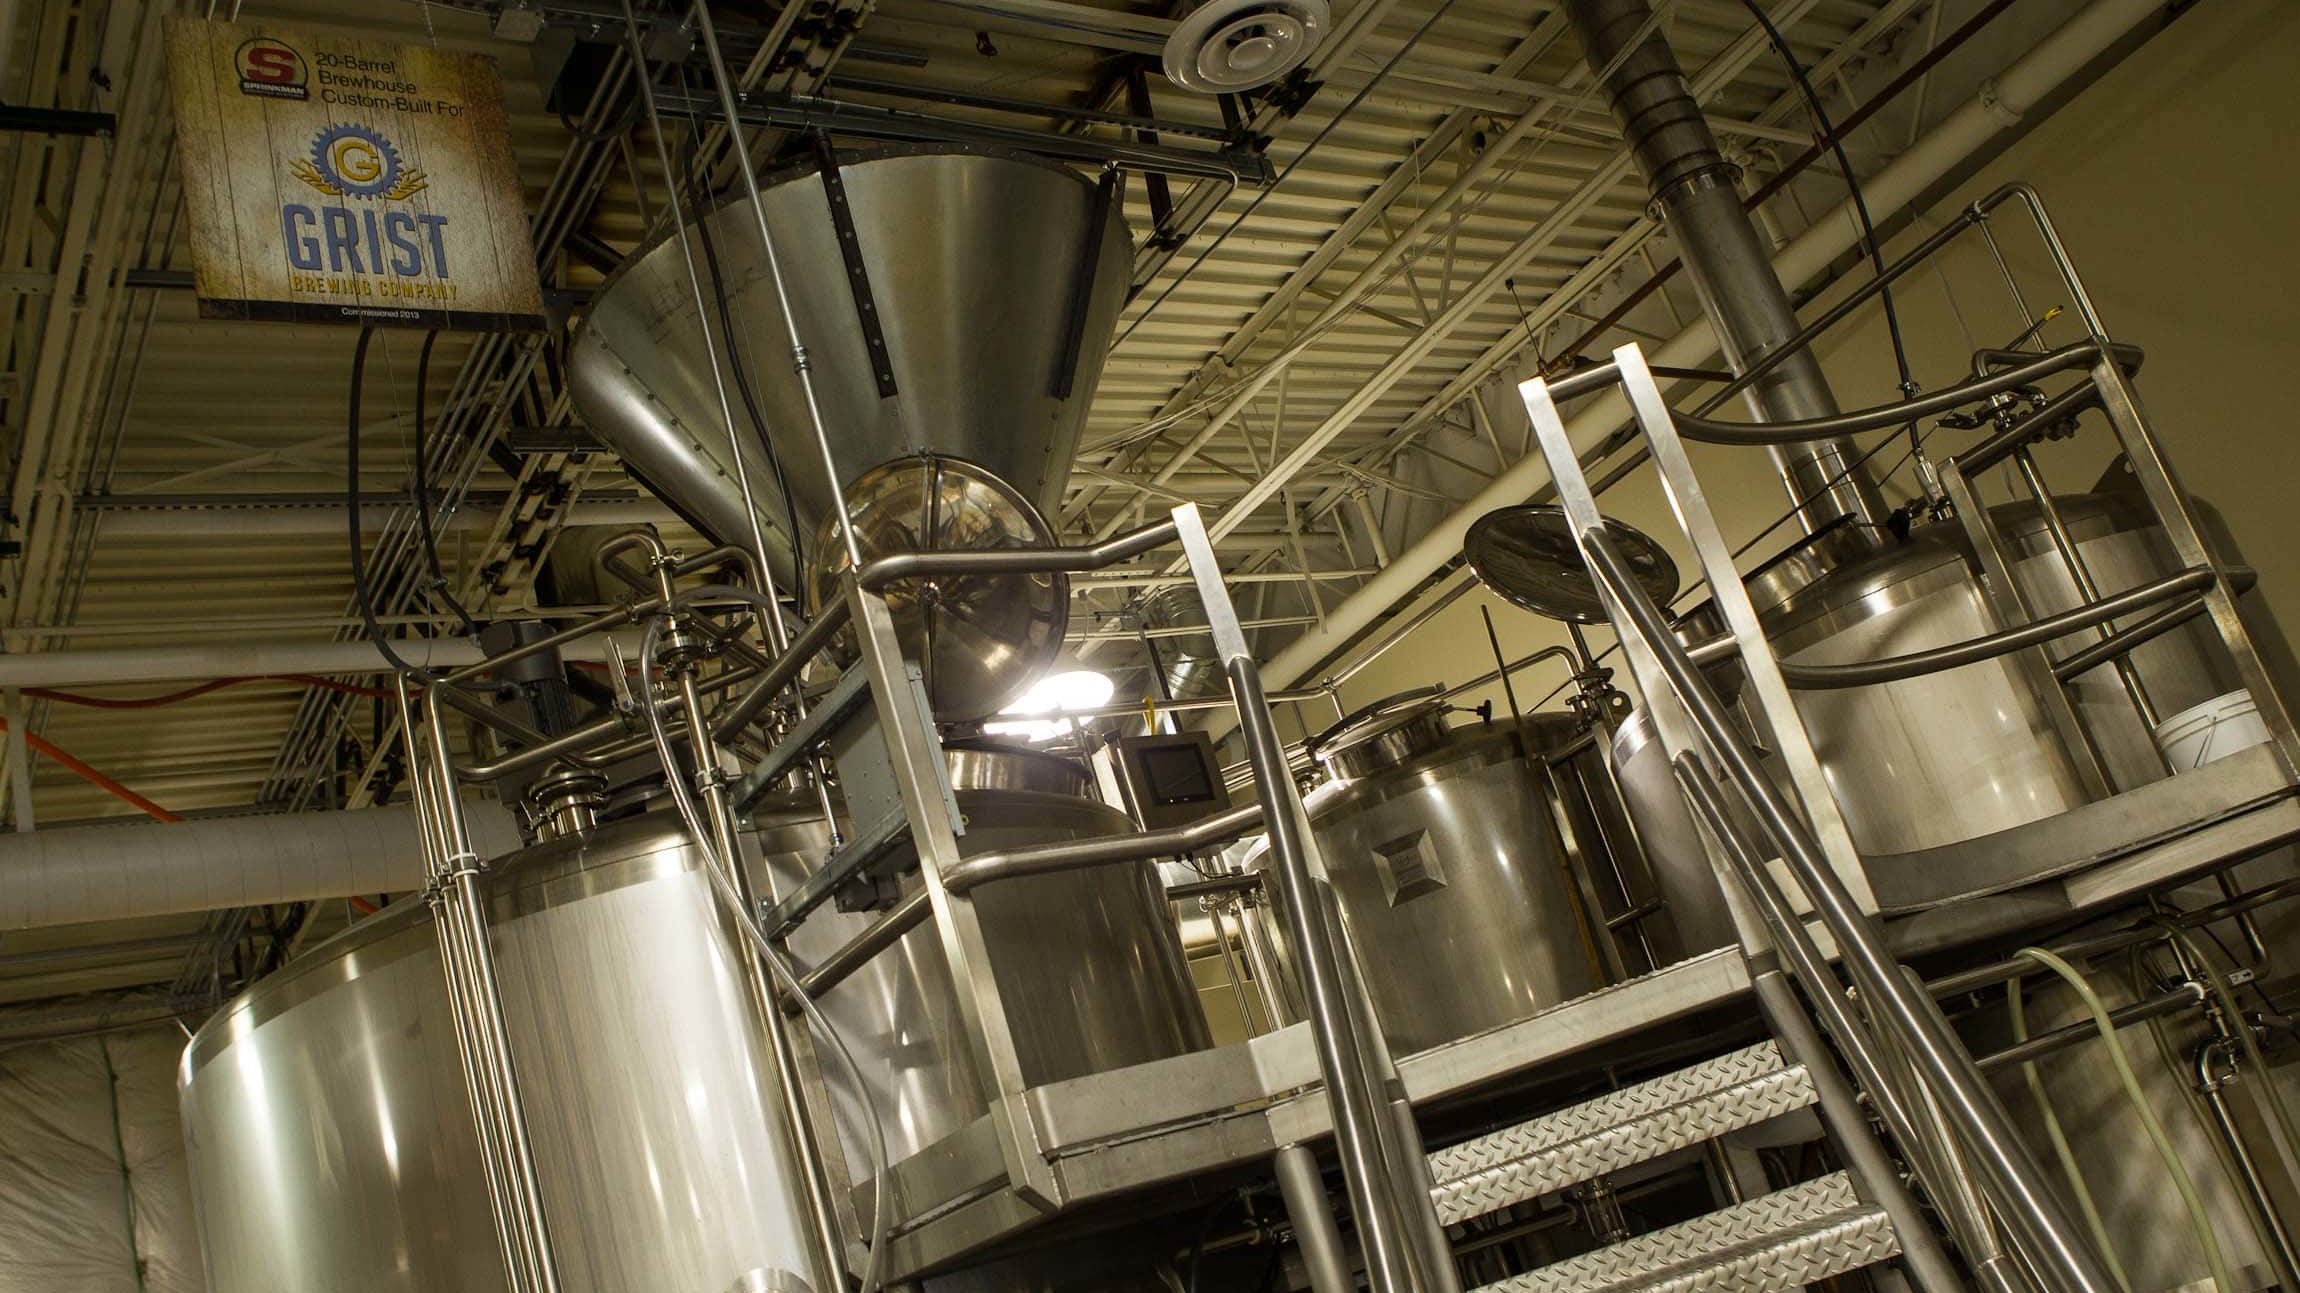 Equipment at Grist Brewing Company.